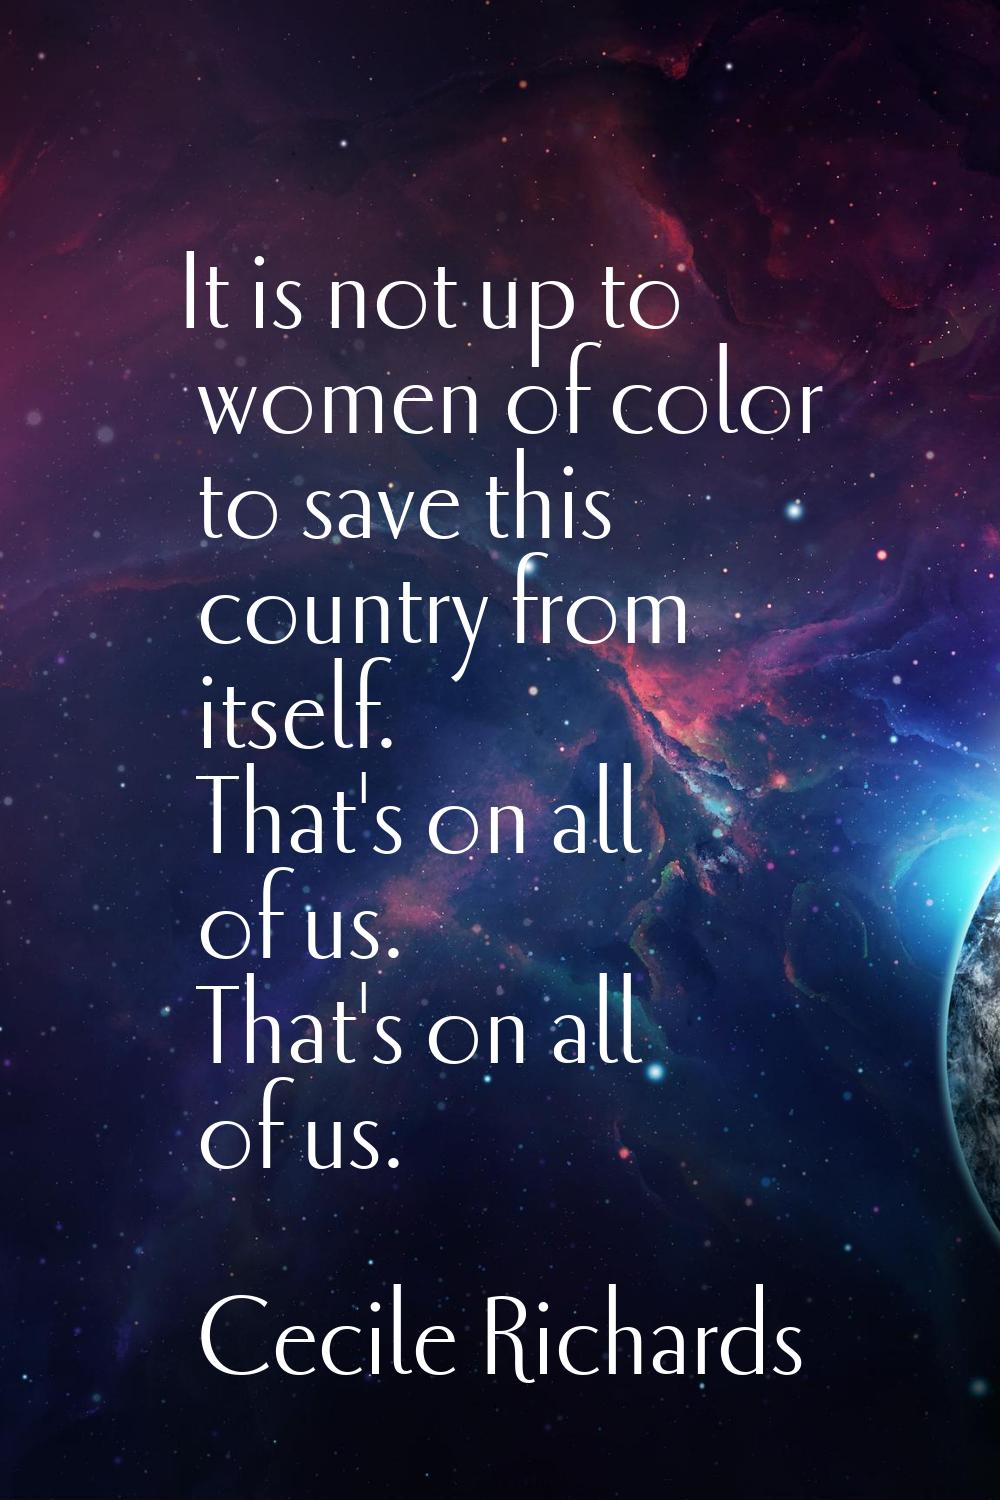 It is not up to women of color to save this country from itself. That's on all of us. That's on all